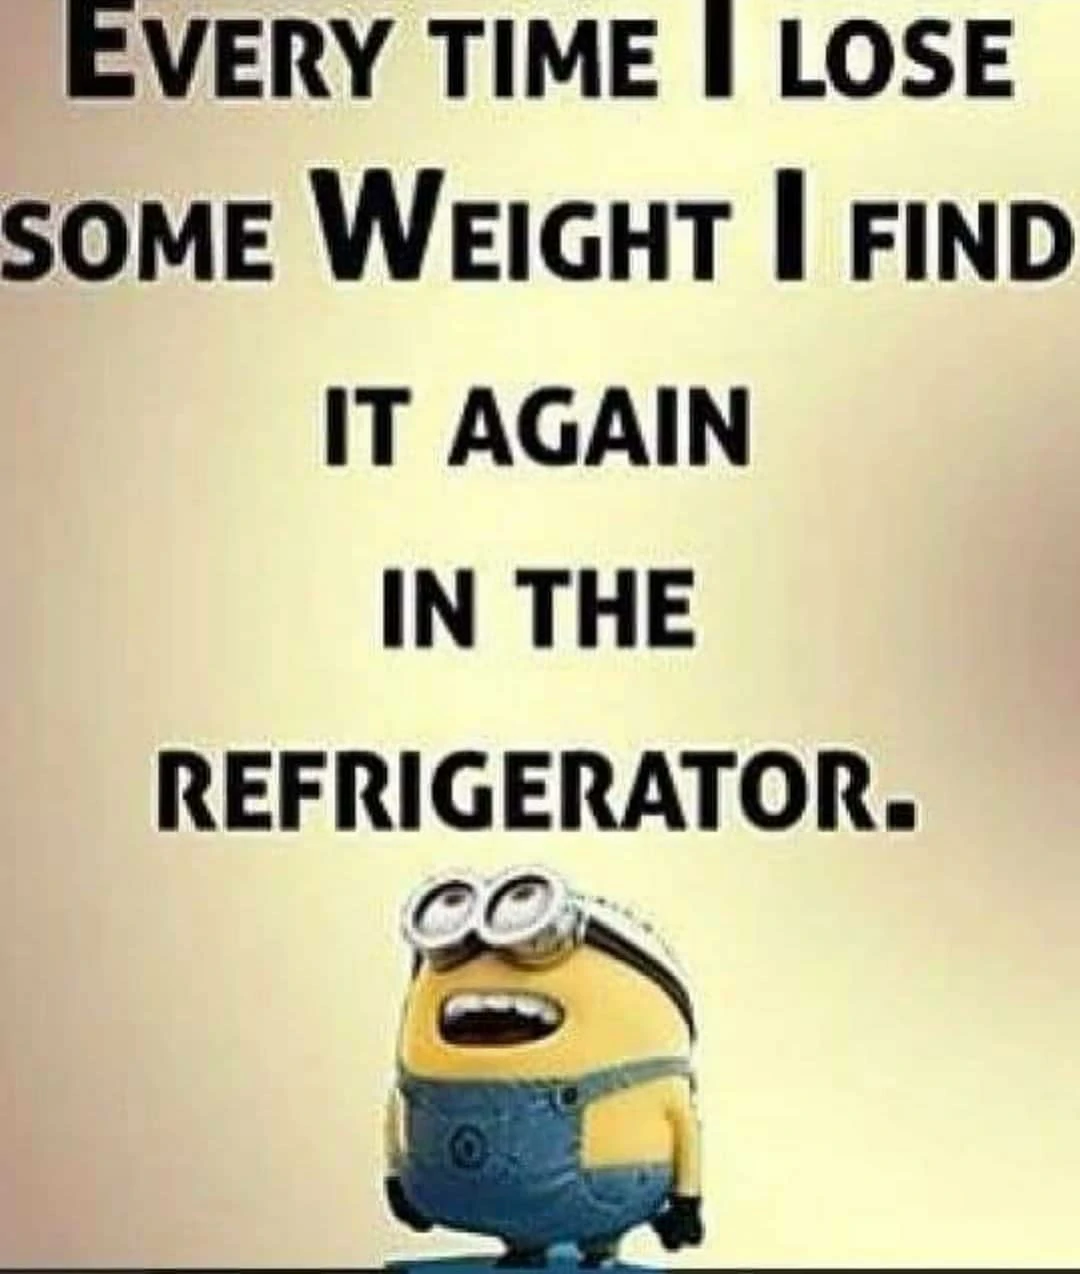 Every time i lose some weight i find it again in the refrigerator